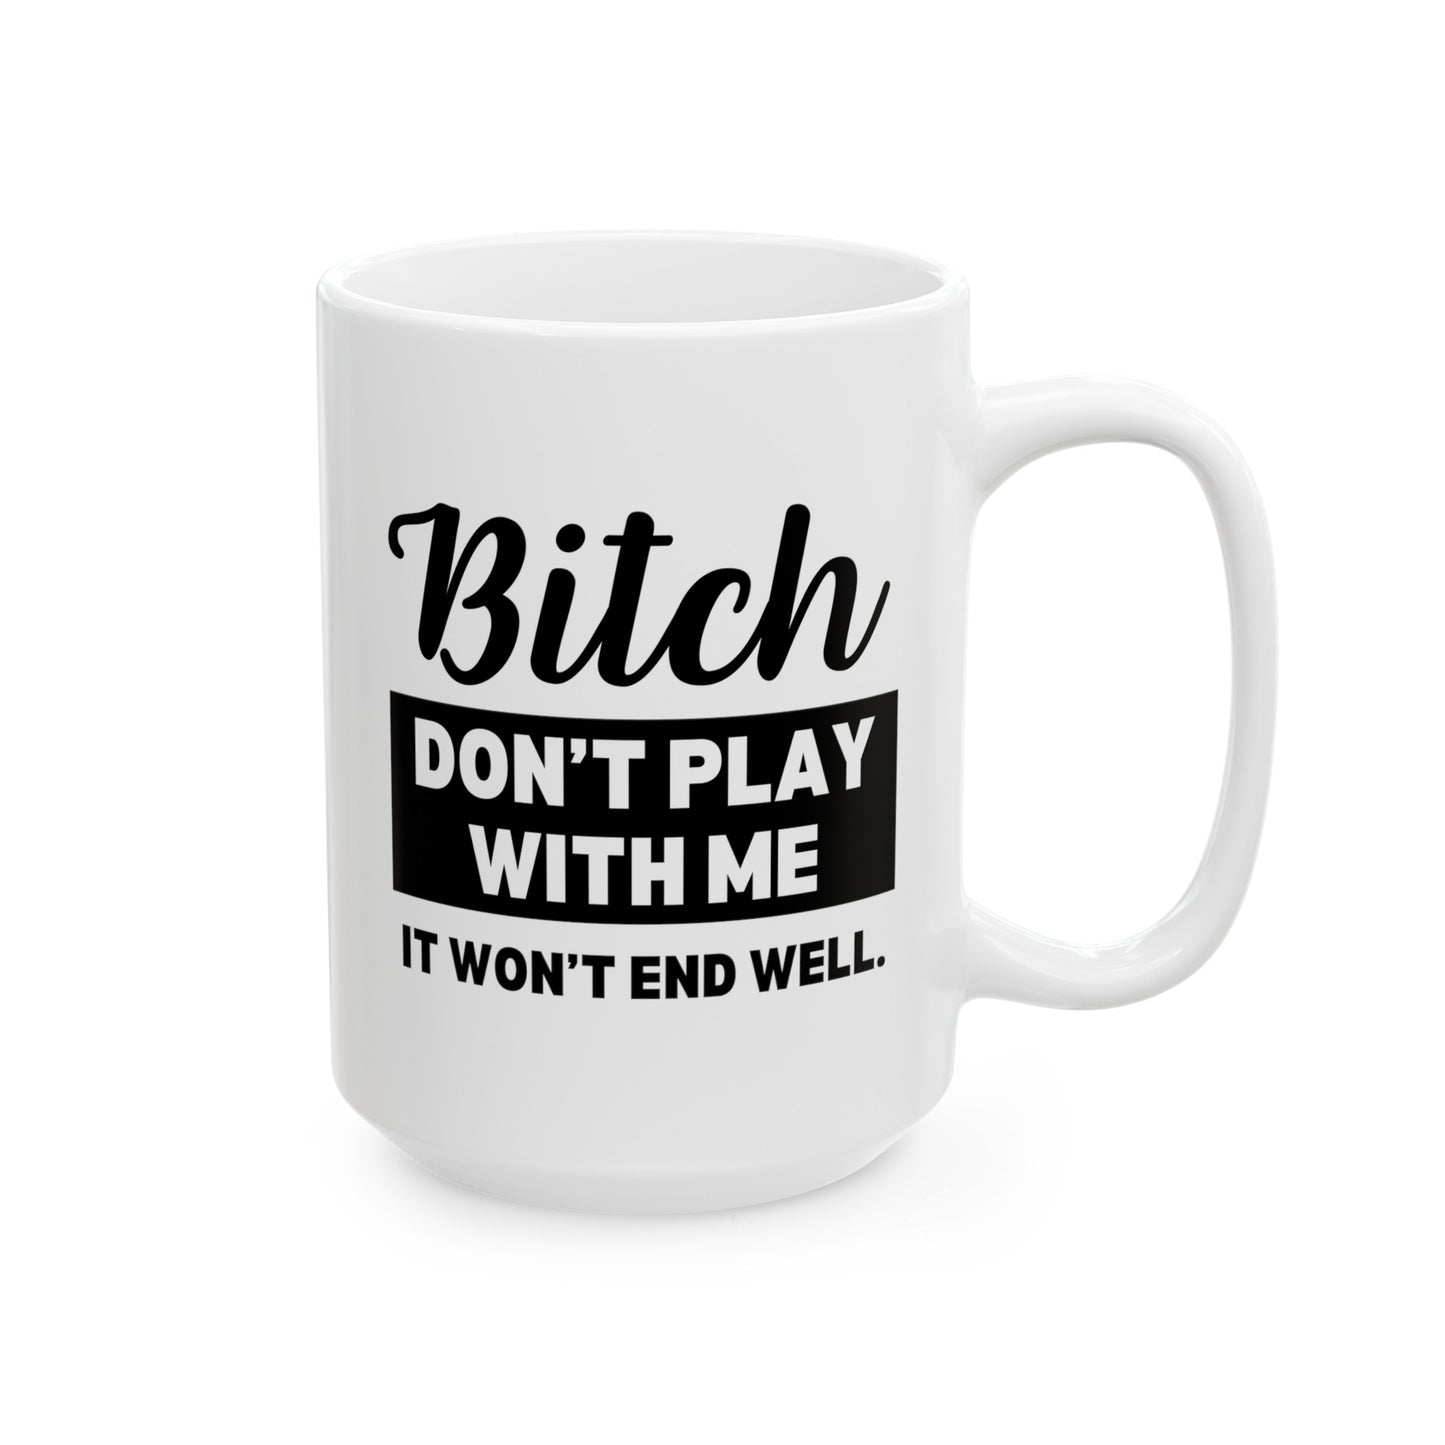 Bitch Don't Play With Me It Won't End Well 15oz white funny large big coffee mug tea cup gift for friend sarcastic sarcasm curse cuss rude novelty waveywares wavey wares wavywares wavy wares